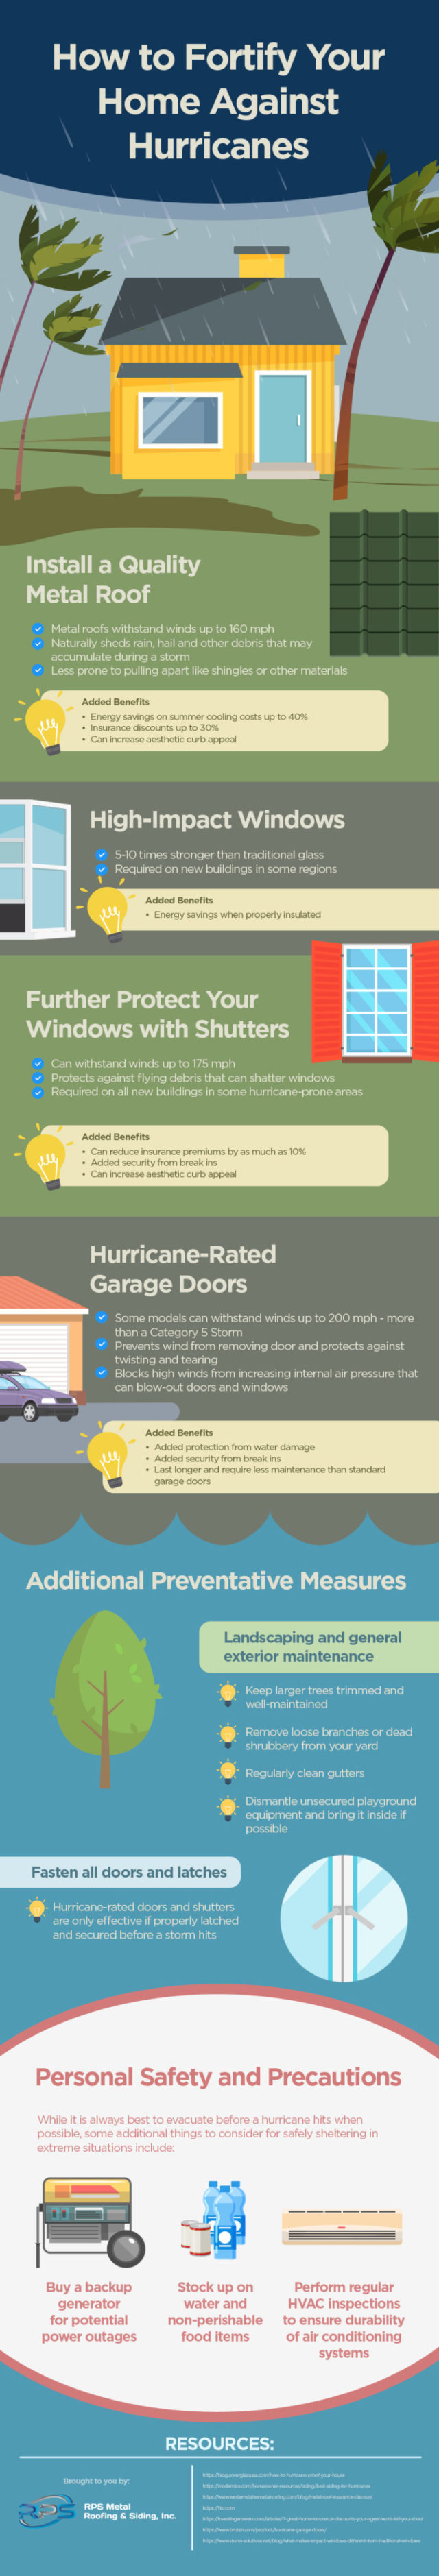 How To Fortify Your Home Against Hurricanes